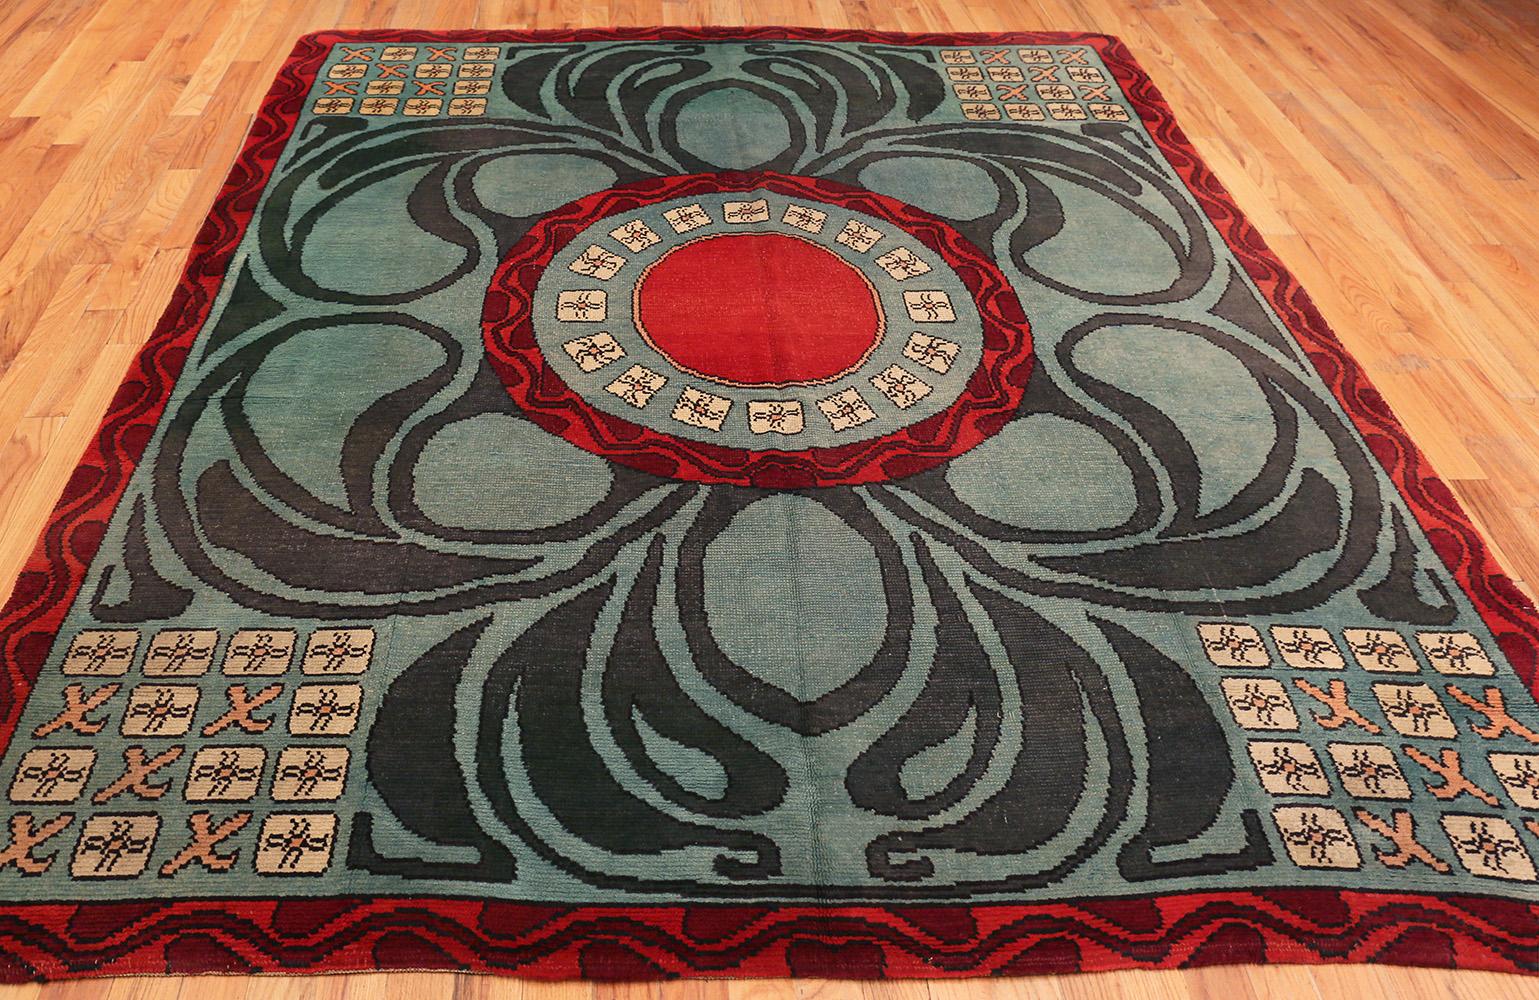 20th Century Geometric Antique French Art Deco Rug. 8 ft x 9 ft 10 in